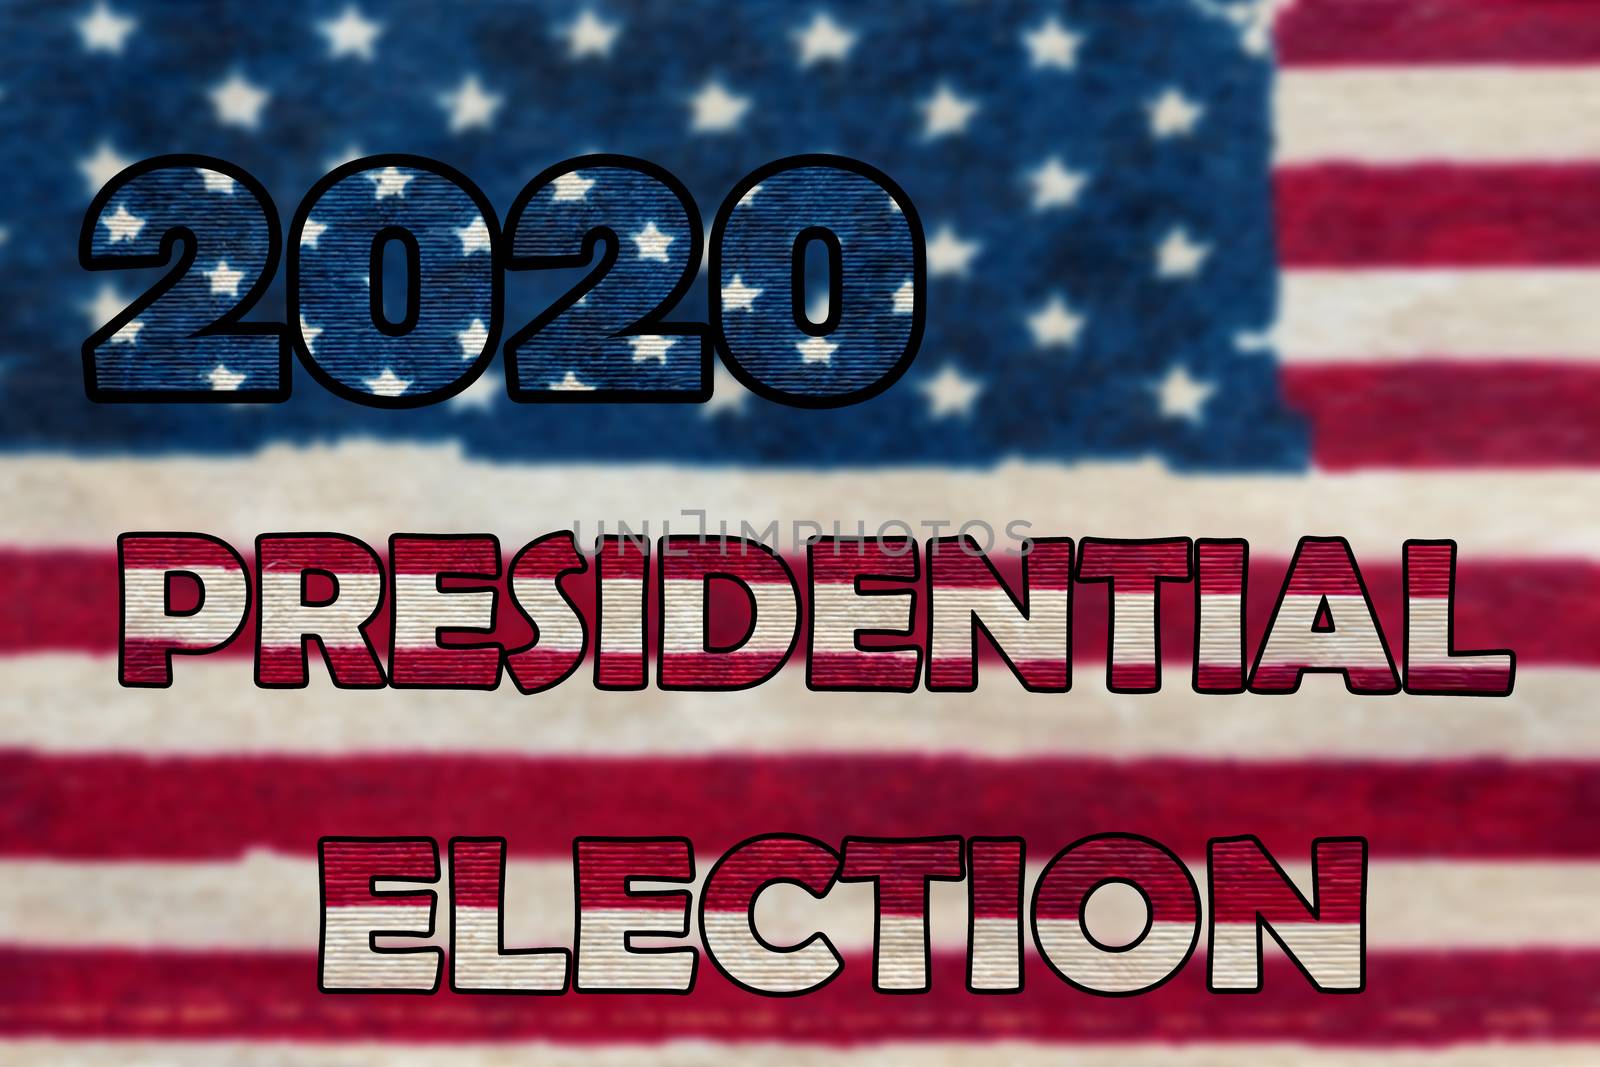 American Presidential Election 2020 background design, banner, poster with the USA flag